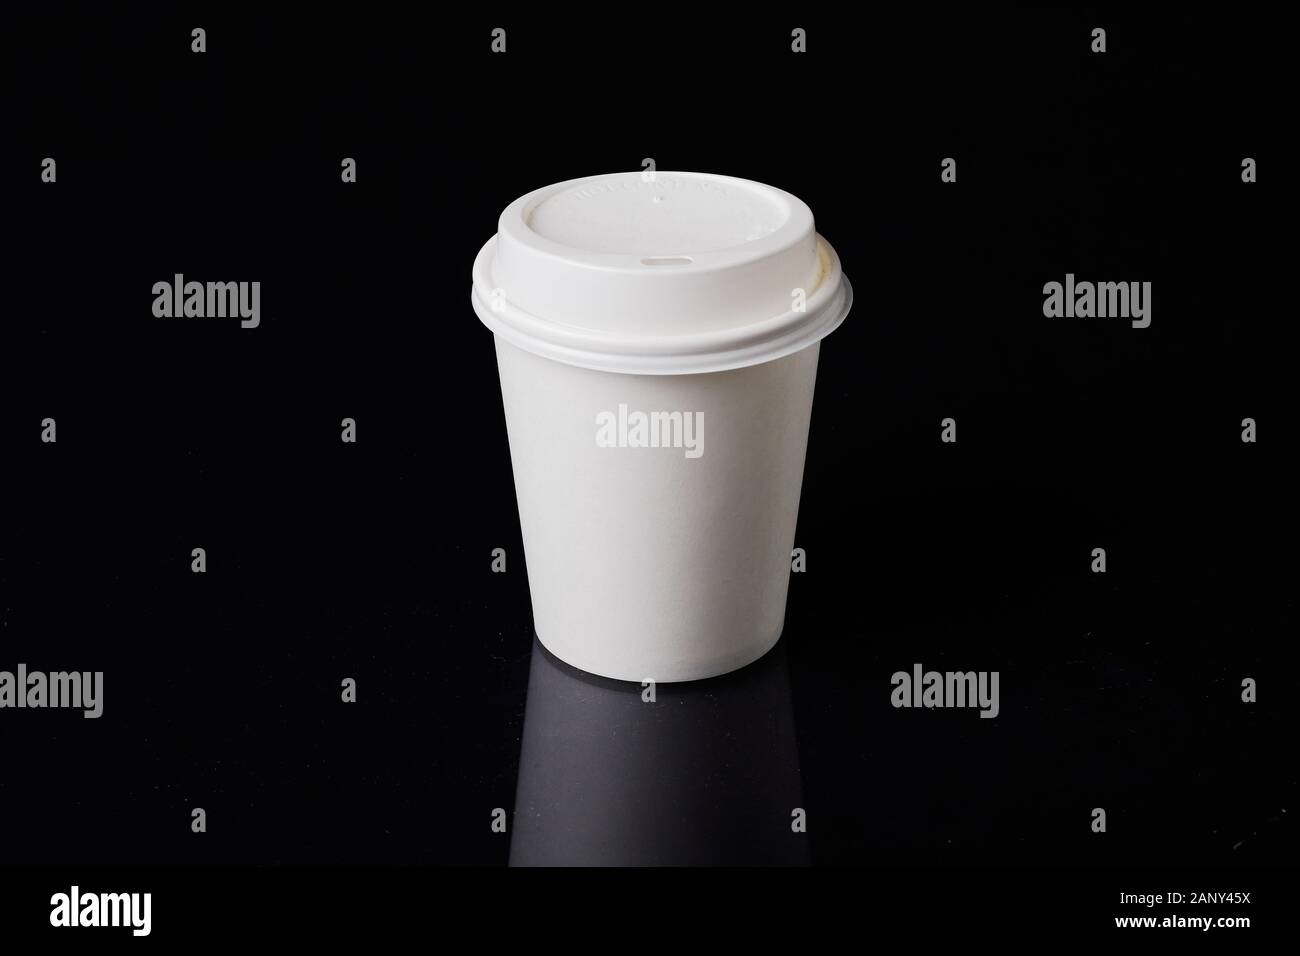 White disposable carboard coffee cup with plastic lid on a black background. Stock Photo